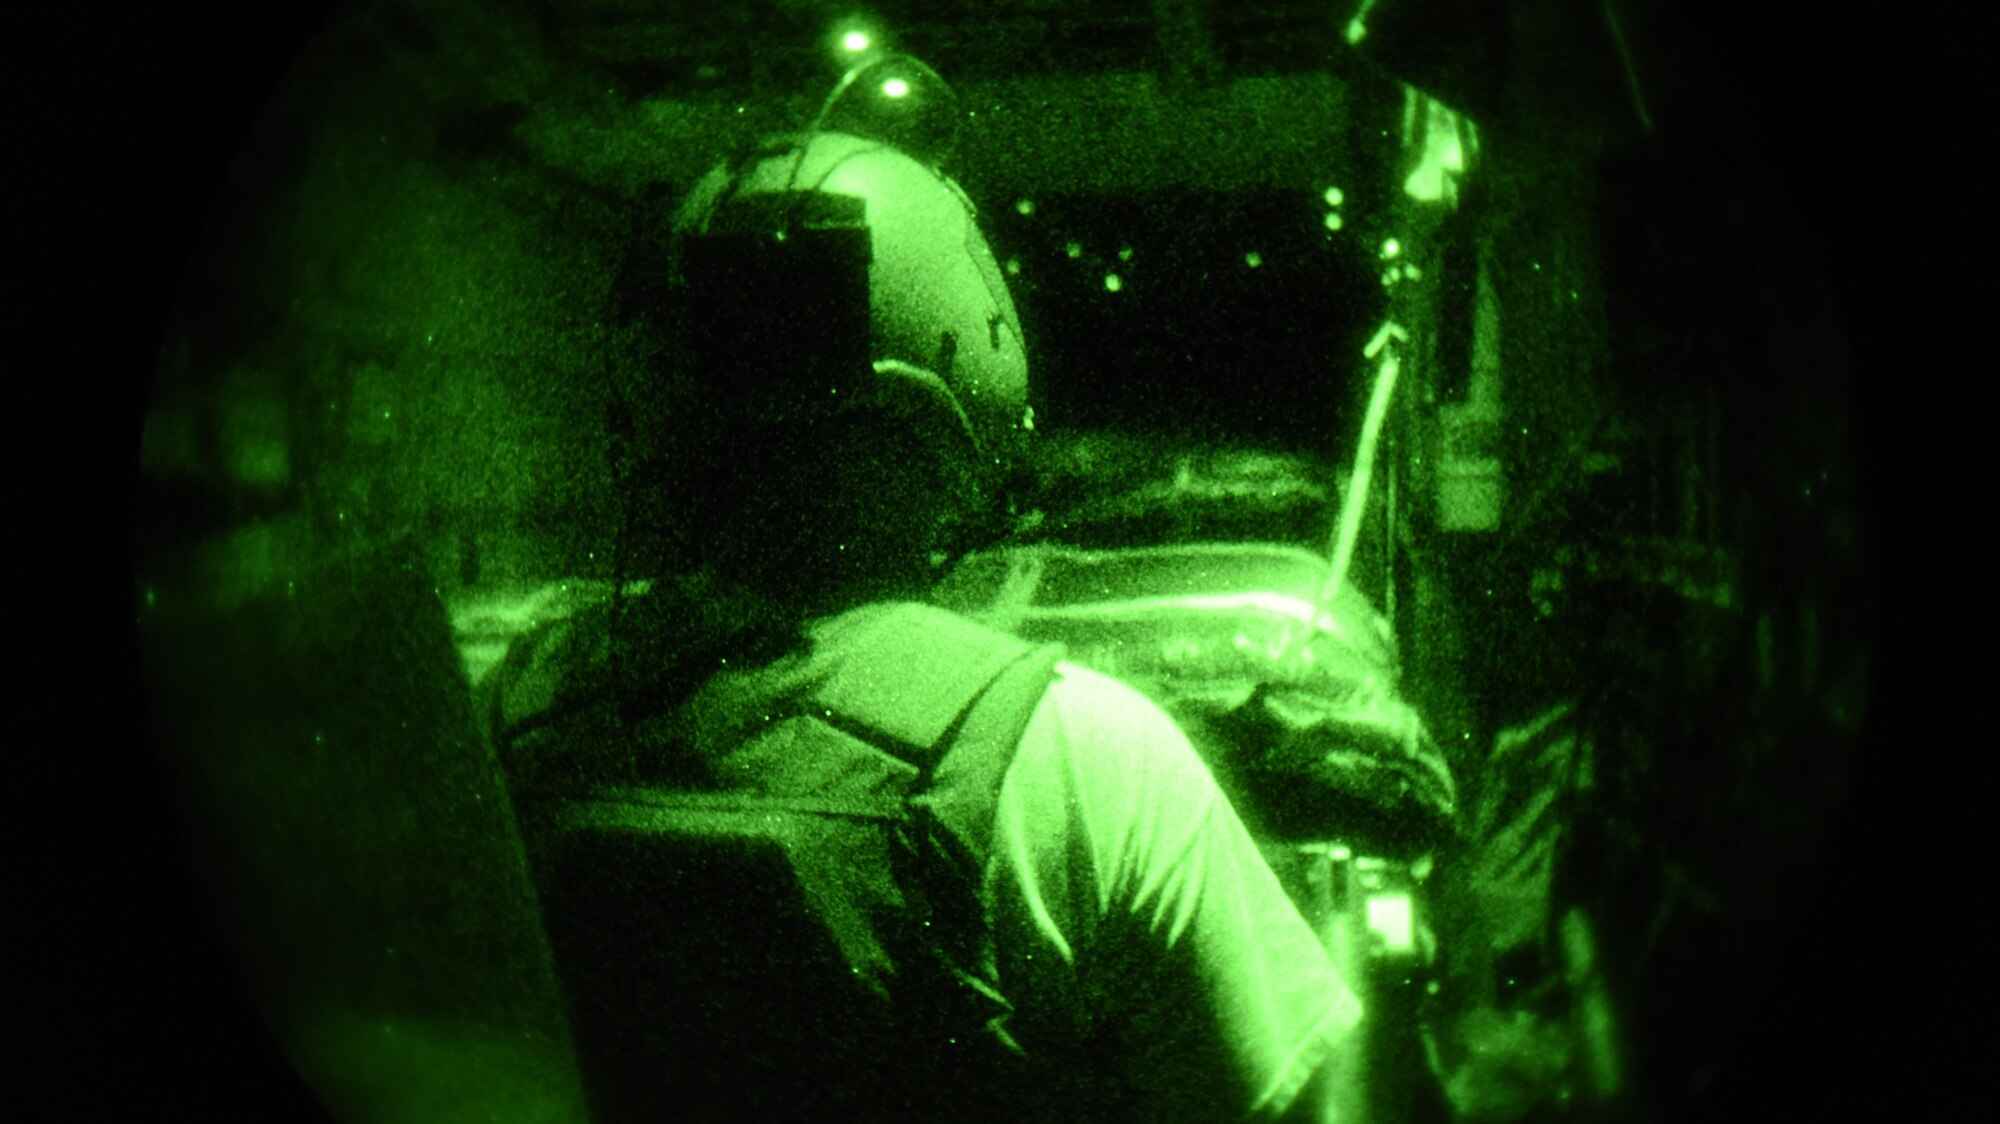 Senior Airman Zachery Carden, a loadmaster with the 737th Expeditionary Airlift Squadron, waits for the cargo door of a C-130 to open in preparation for an air drop, at an undisclosed location in Southwest Asia, July 14, 2017. Air National Guardsmen and their aircraft, deployed in support of Combined Joint Task Force – Operation Inherent Resolve, execute daily airlift missions out of one of the busiest air bases in the U.S. Air Forces Central Command area of responsibility. (U.S. Air Force photo by Tech. Sgt.  Jonathan Hehnly)